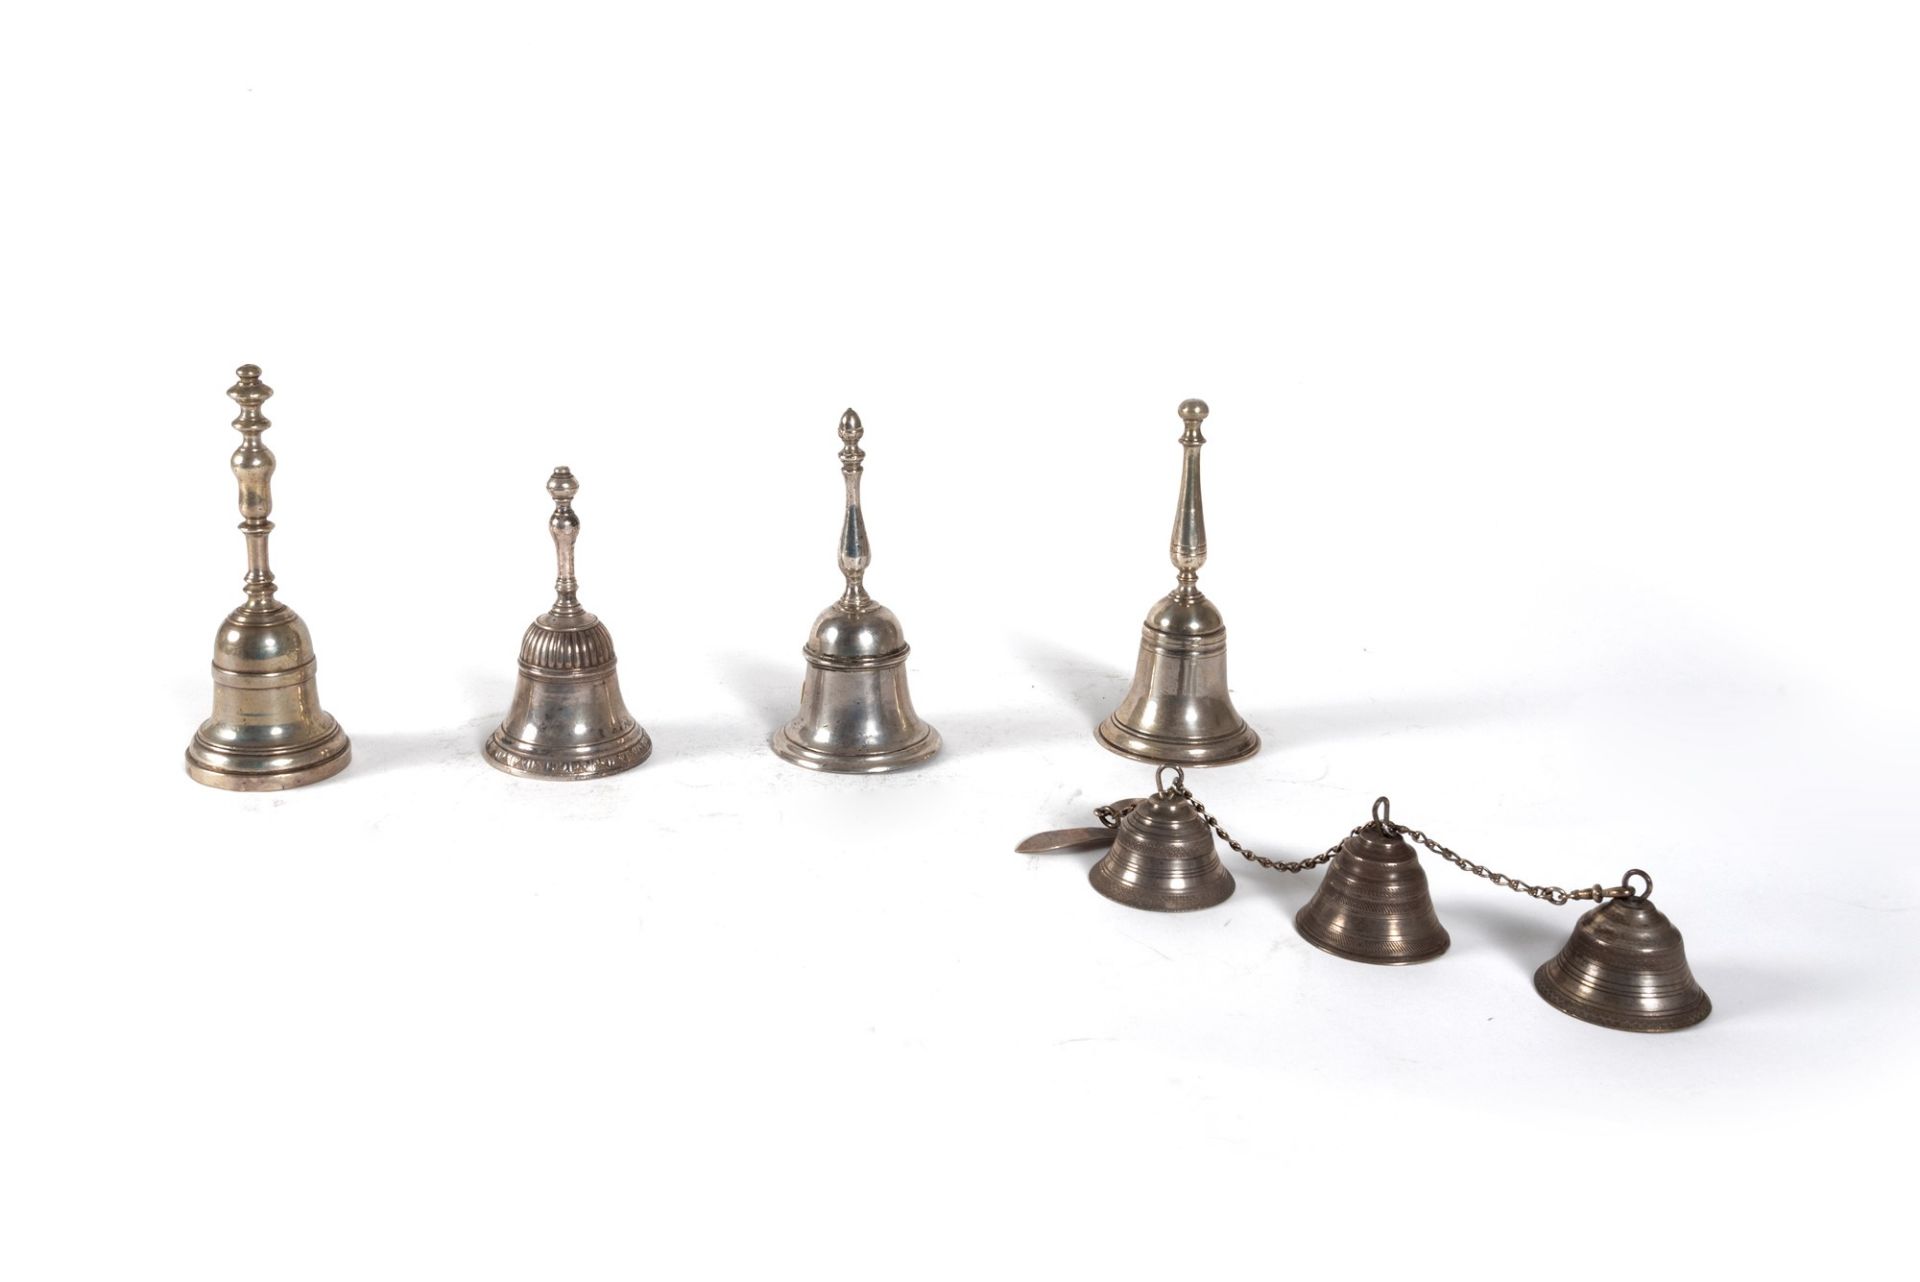 Lot consisting of five silver bells, Italy, 18th-19th centuries